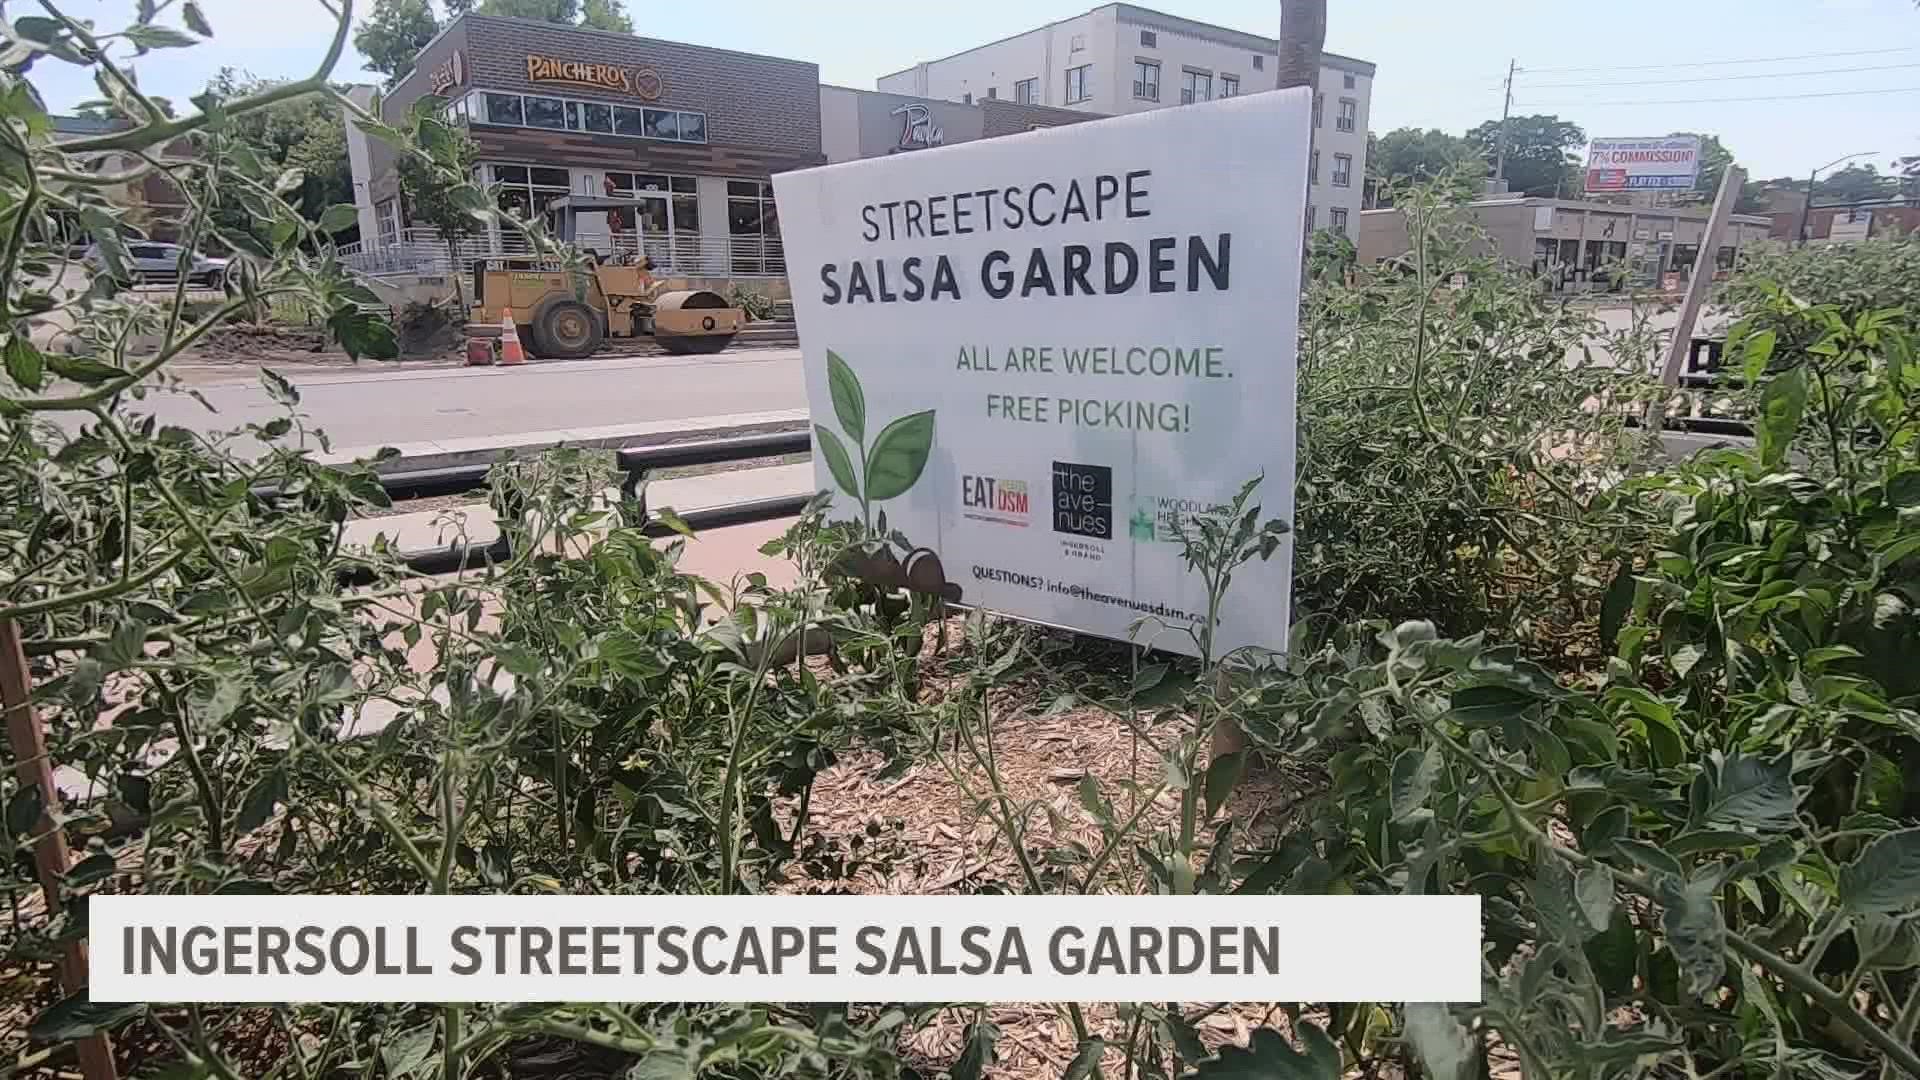 Initially, some tomatoes were planted by a mystery neighbor. Then, the plan was put into action as Eat Greater Des Moines donated pepper and tomato plants.